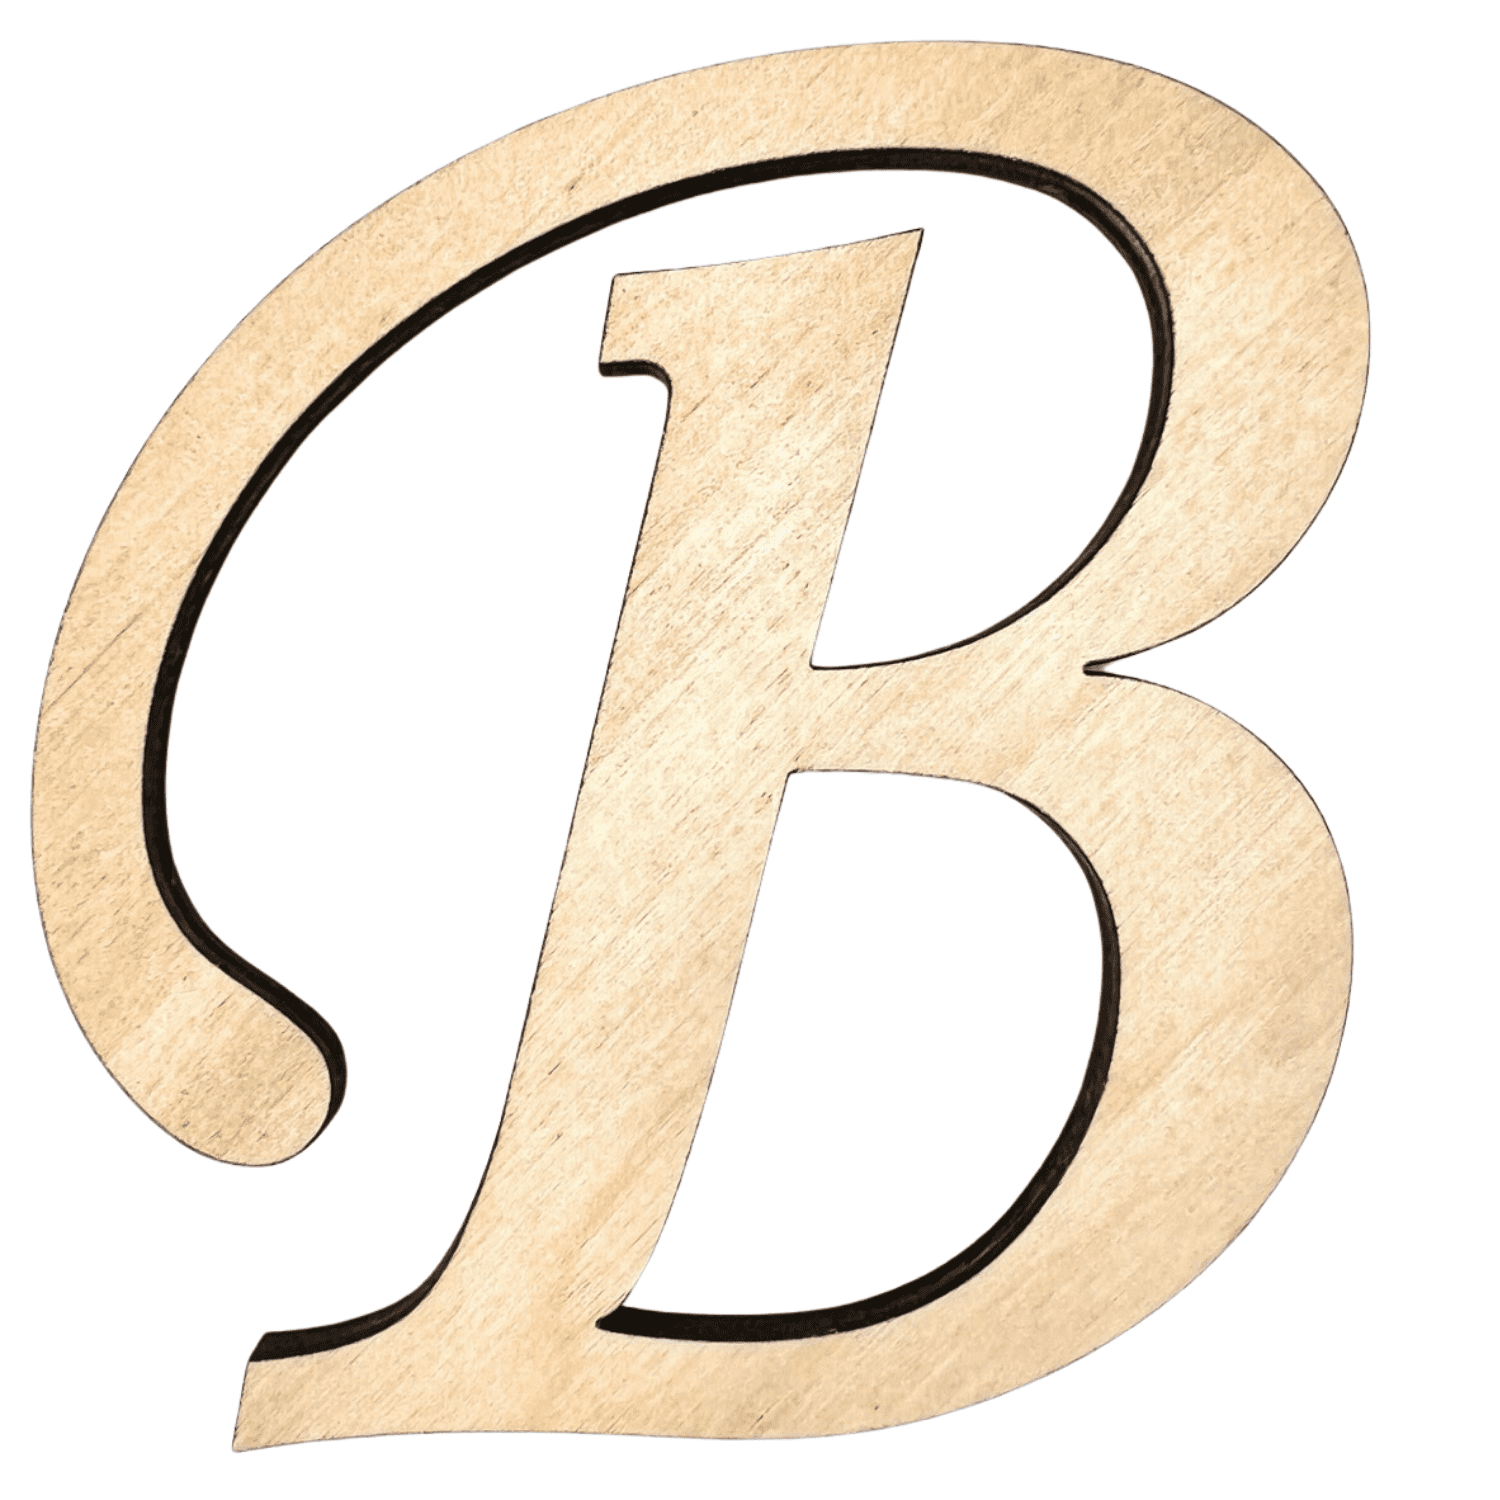 2 Tall Birch Wood Letter B Krafty Supply 1 4 Thick Wooden Letters